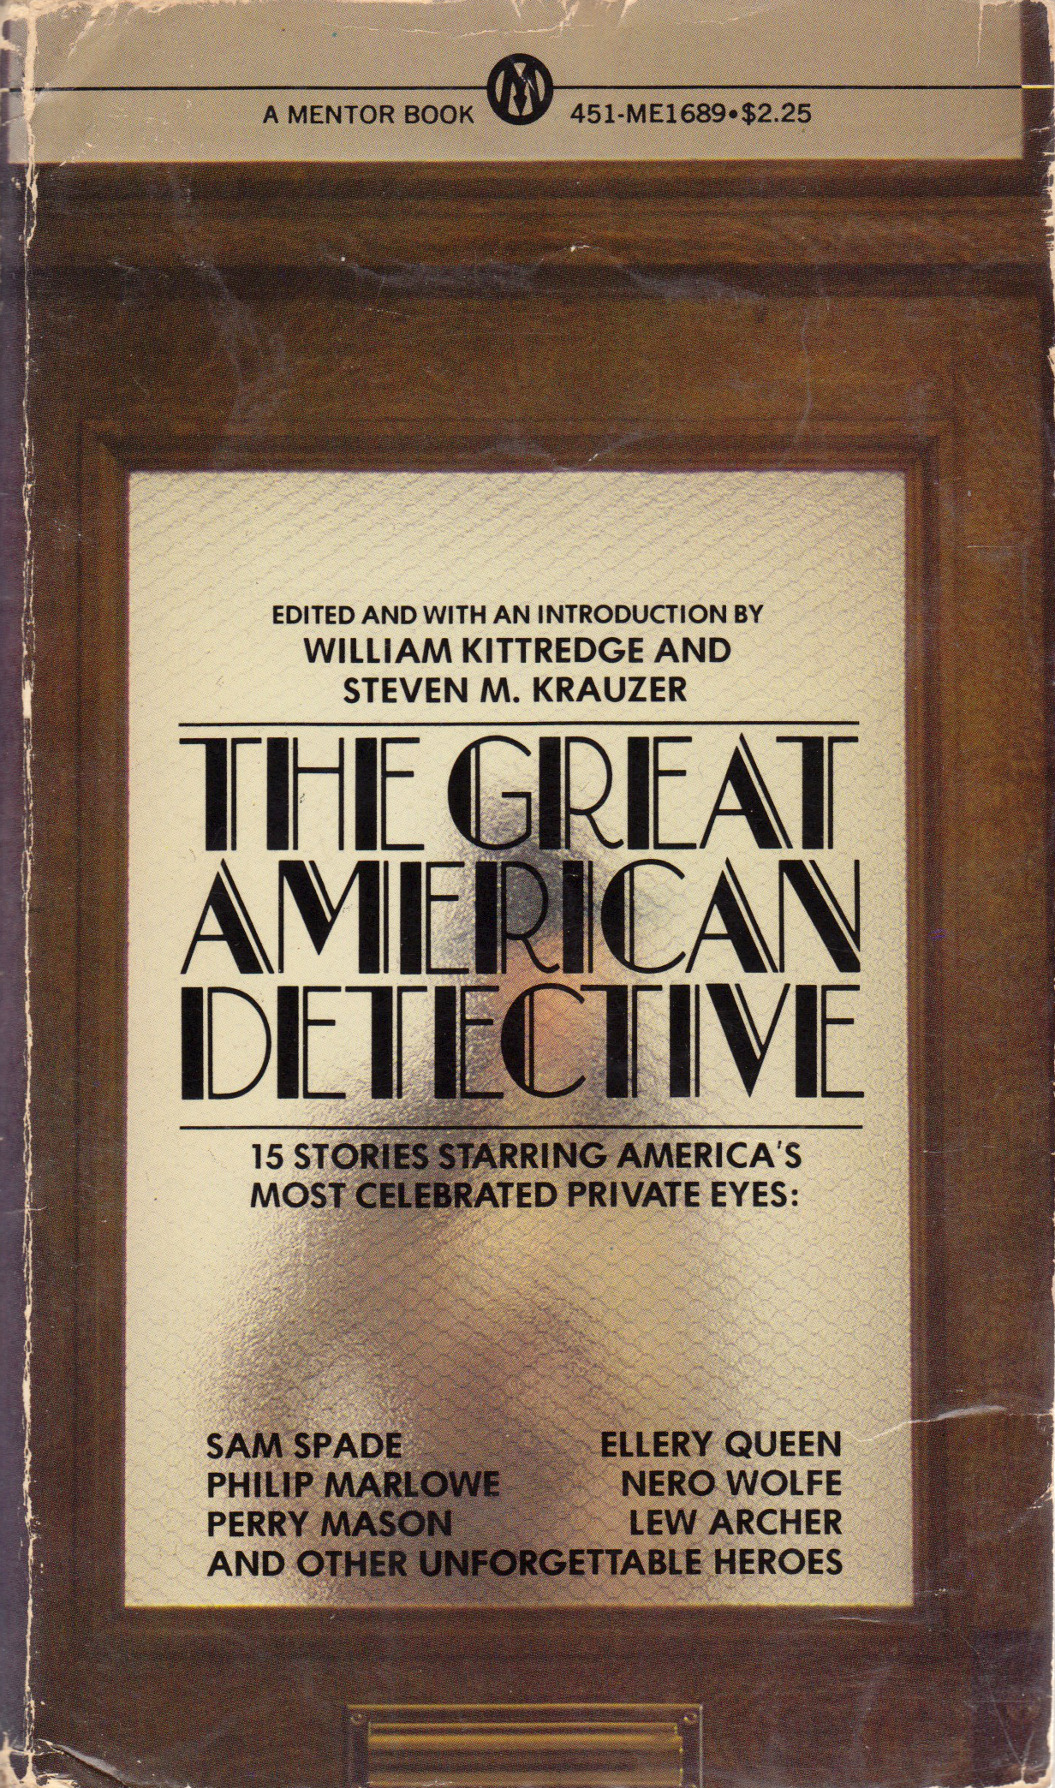 The Great American Detective, edited by William Kittredge and Steven M. Krauzer (Mentor,